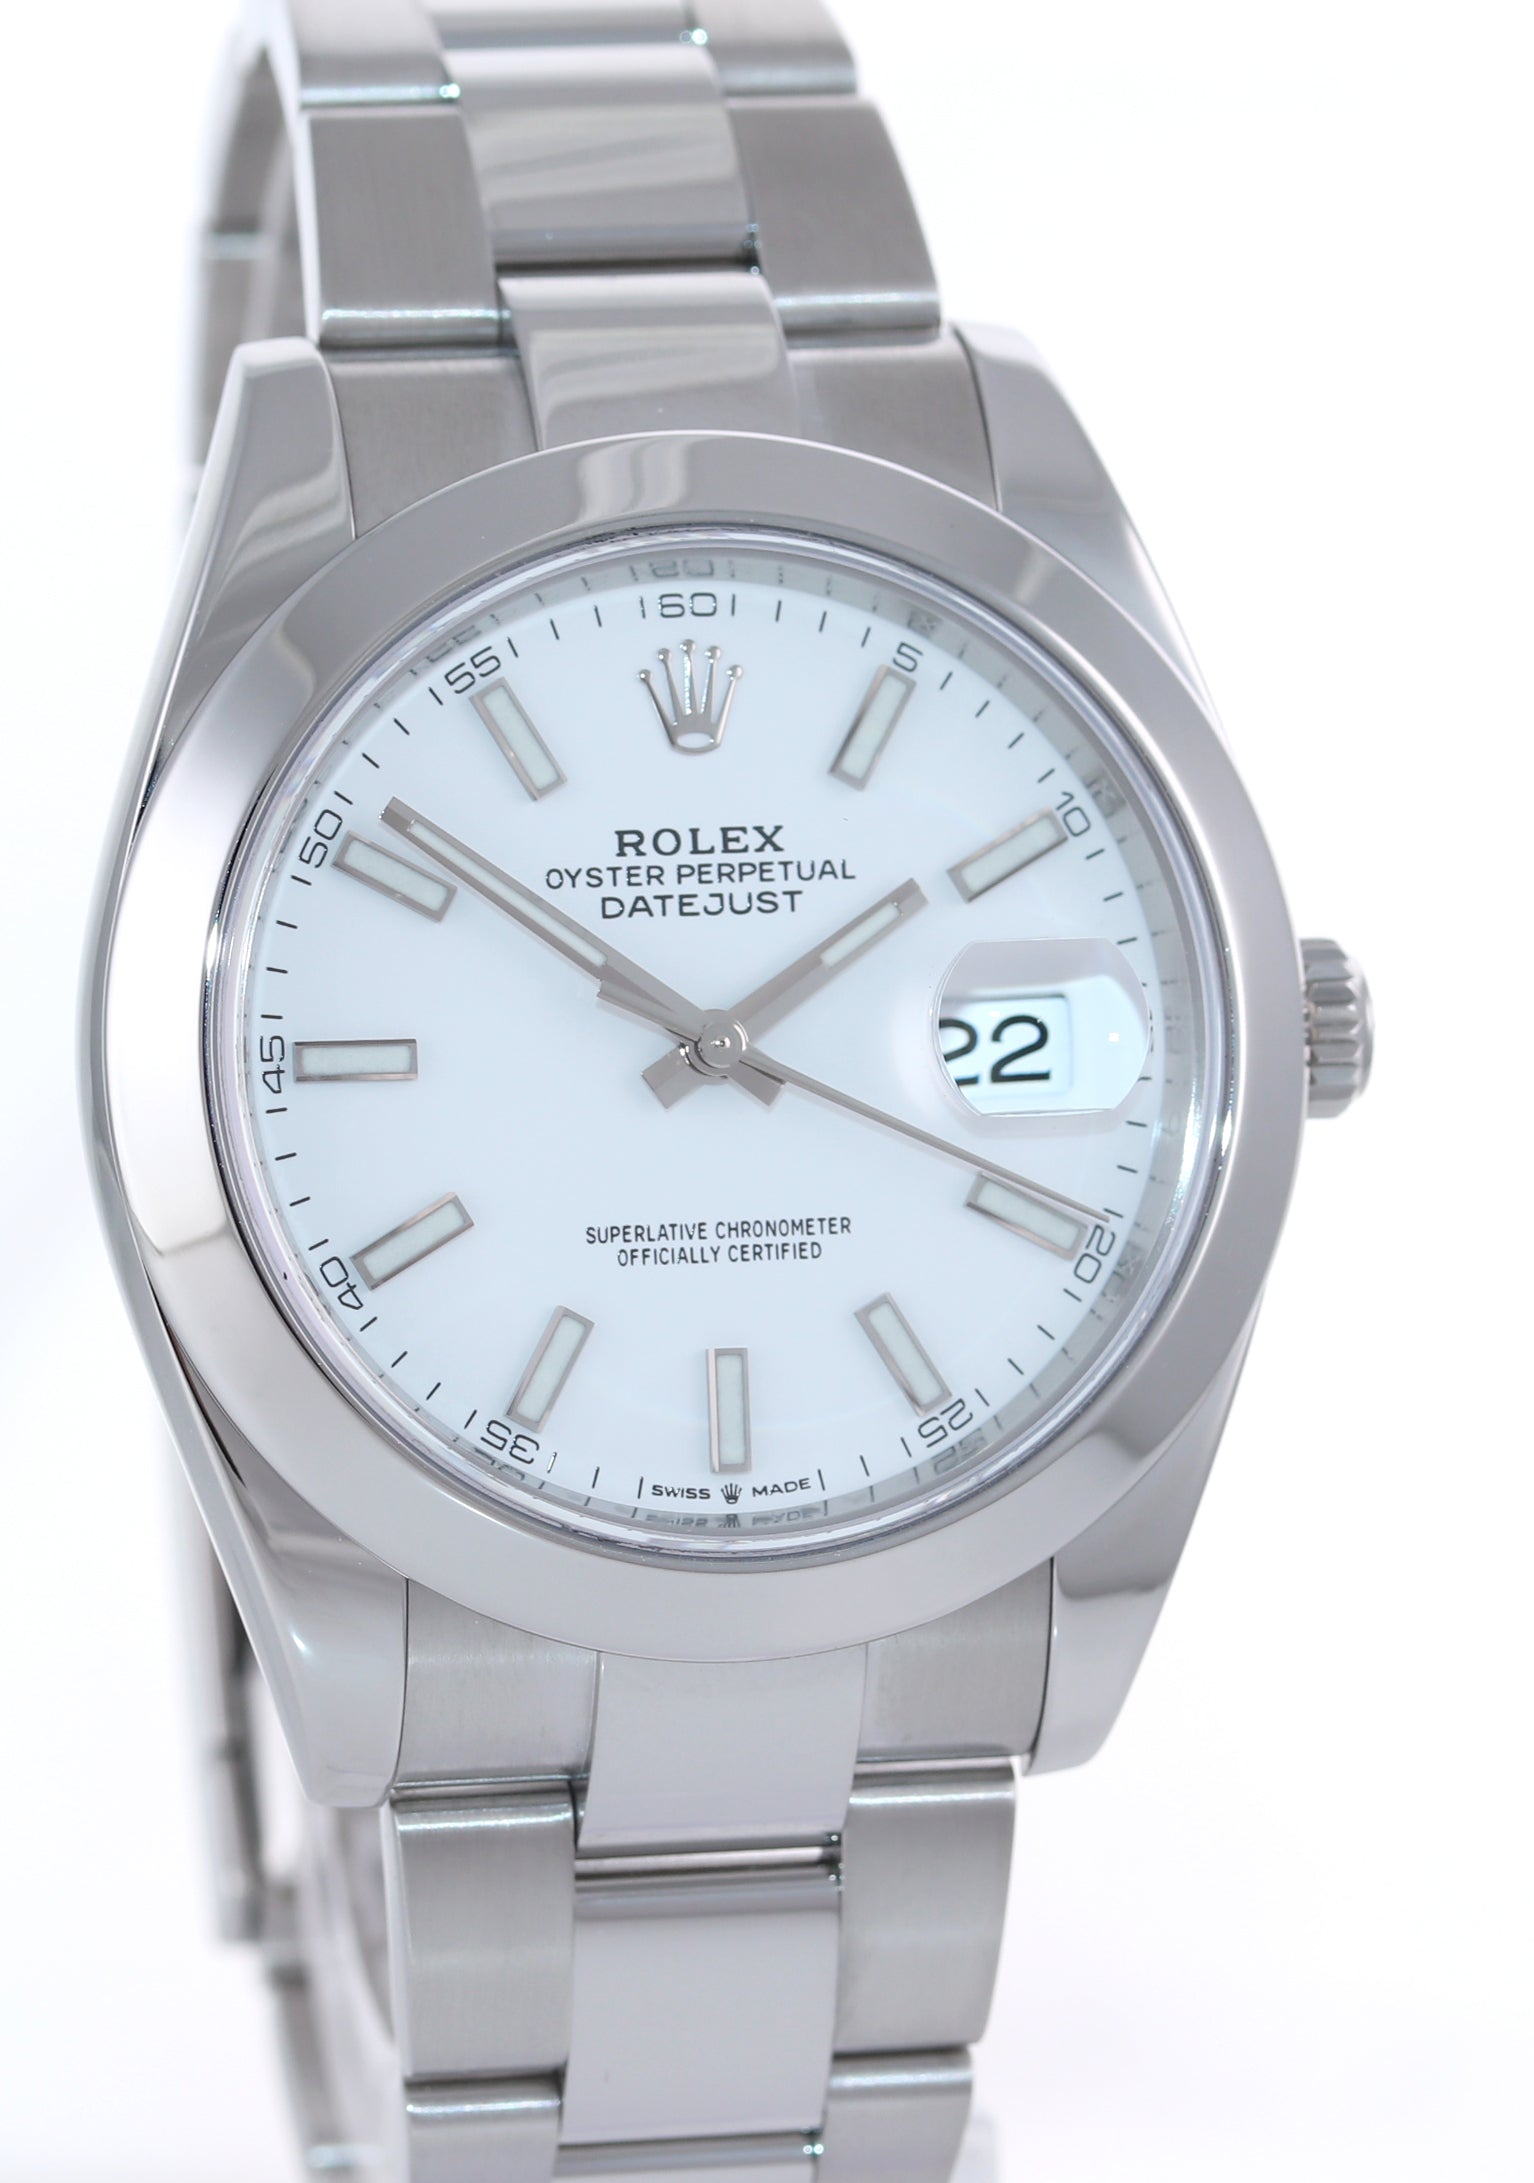 2021 NEW PAPERS Rolex DateJust 41 Steel 126300 White 41mm Watch Box